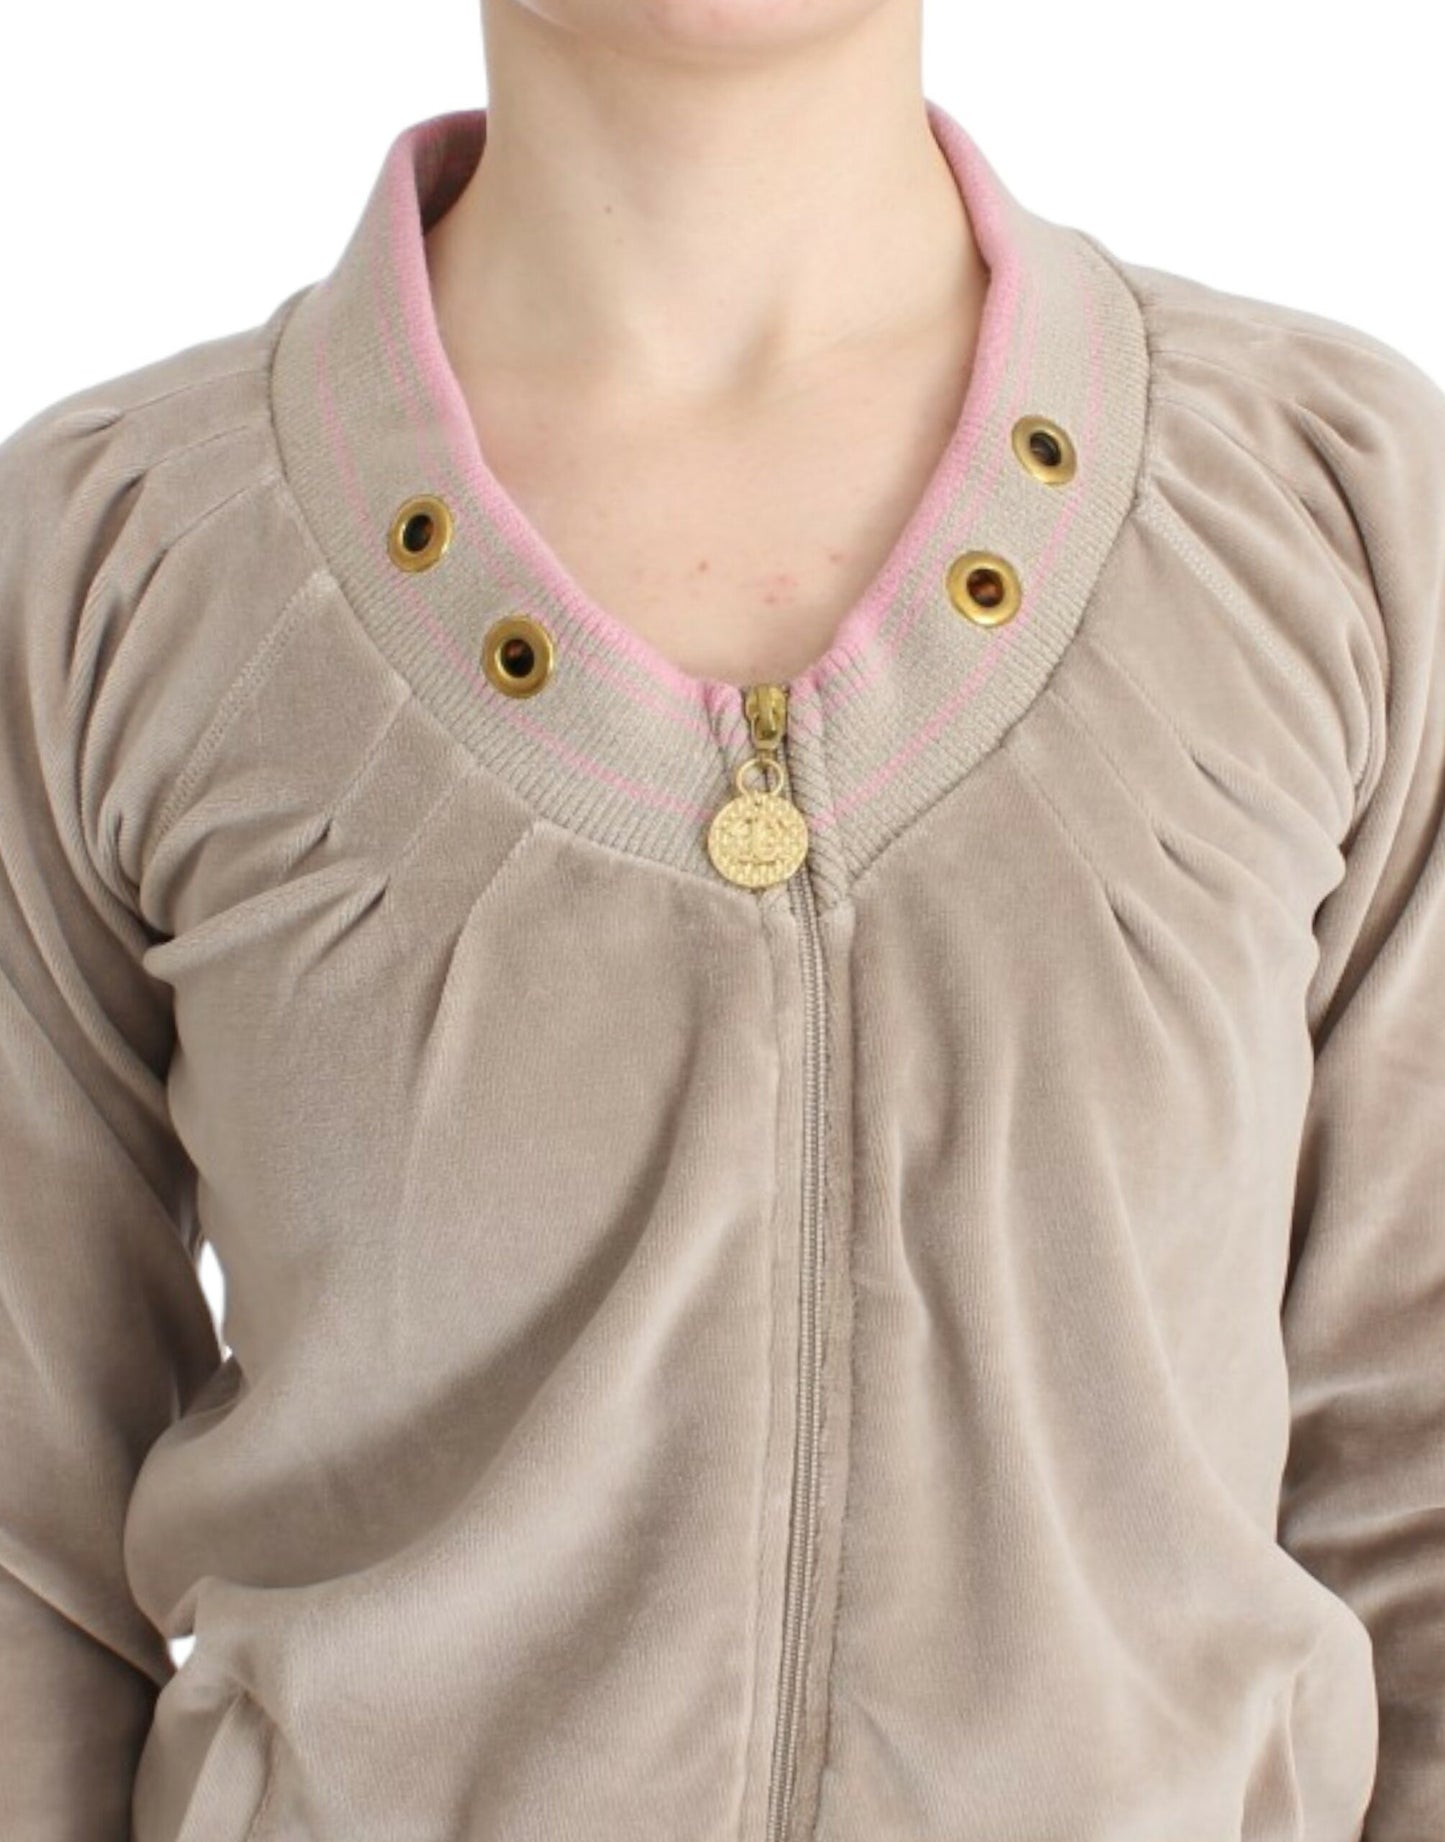 Beige Zip Cardigan with Gold Tone Accents